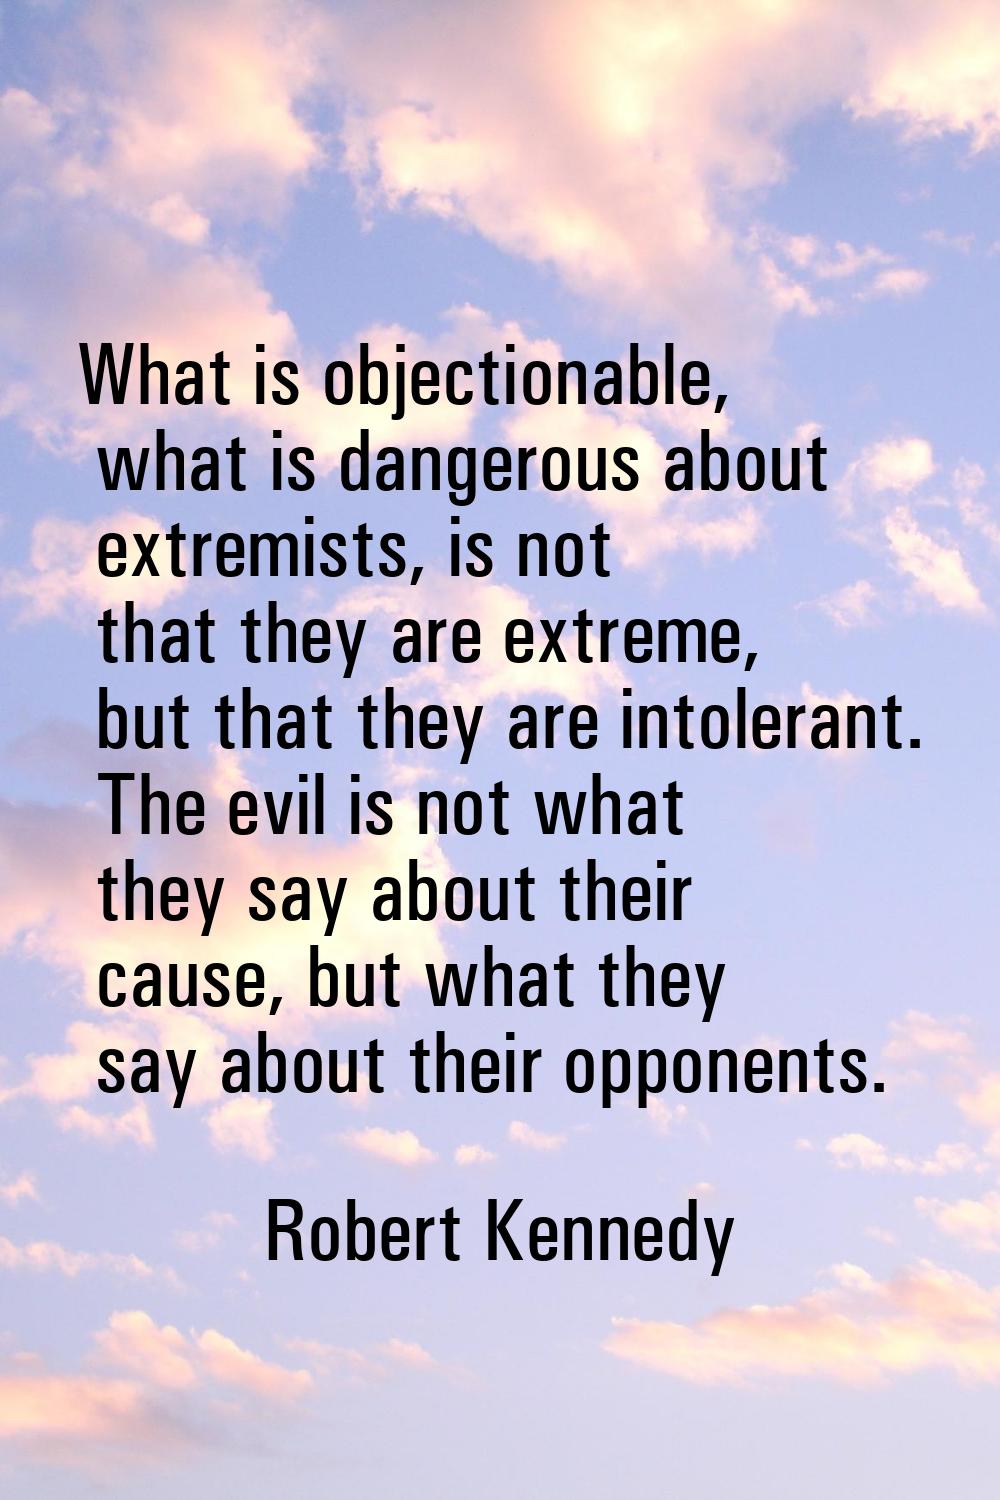 What is objectionable, what is dangerous about extremists, is not that they are extreme, but that t